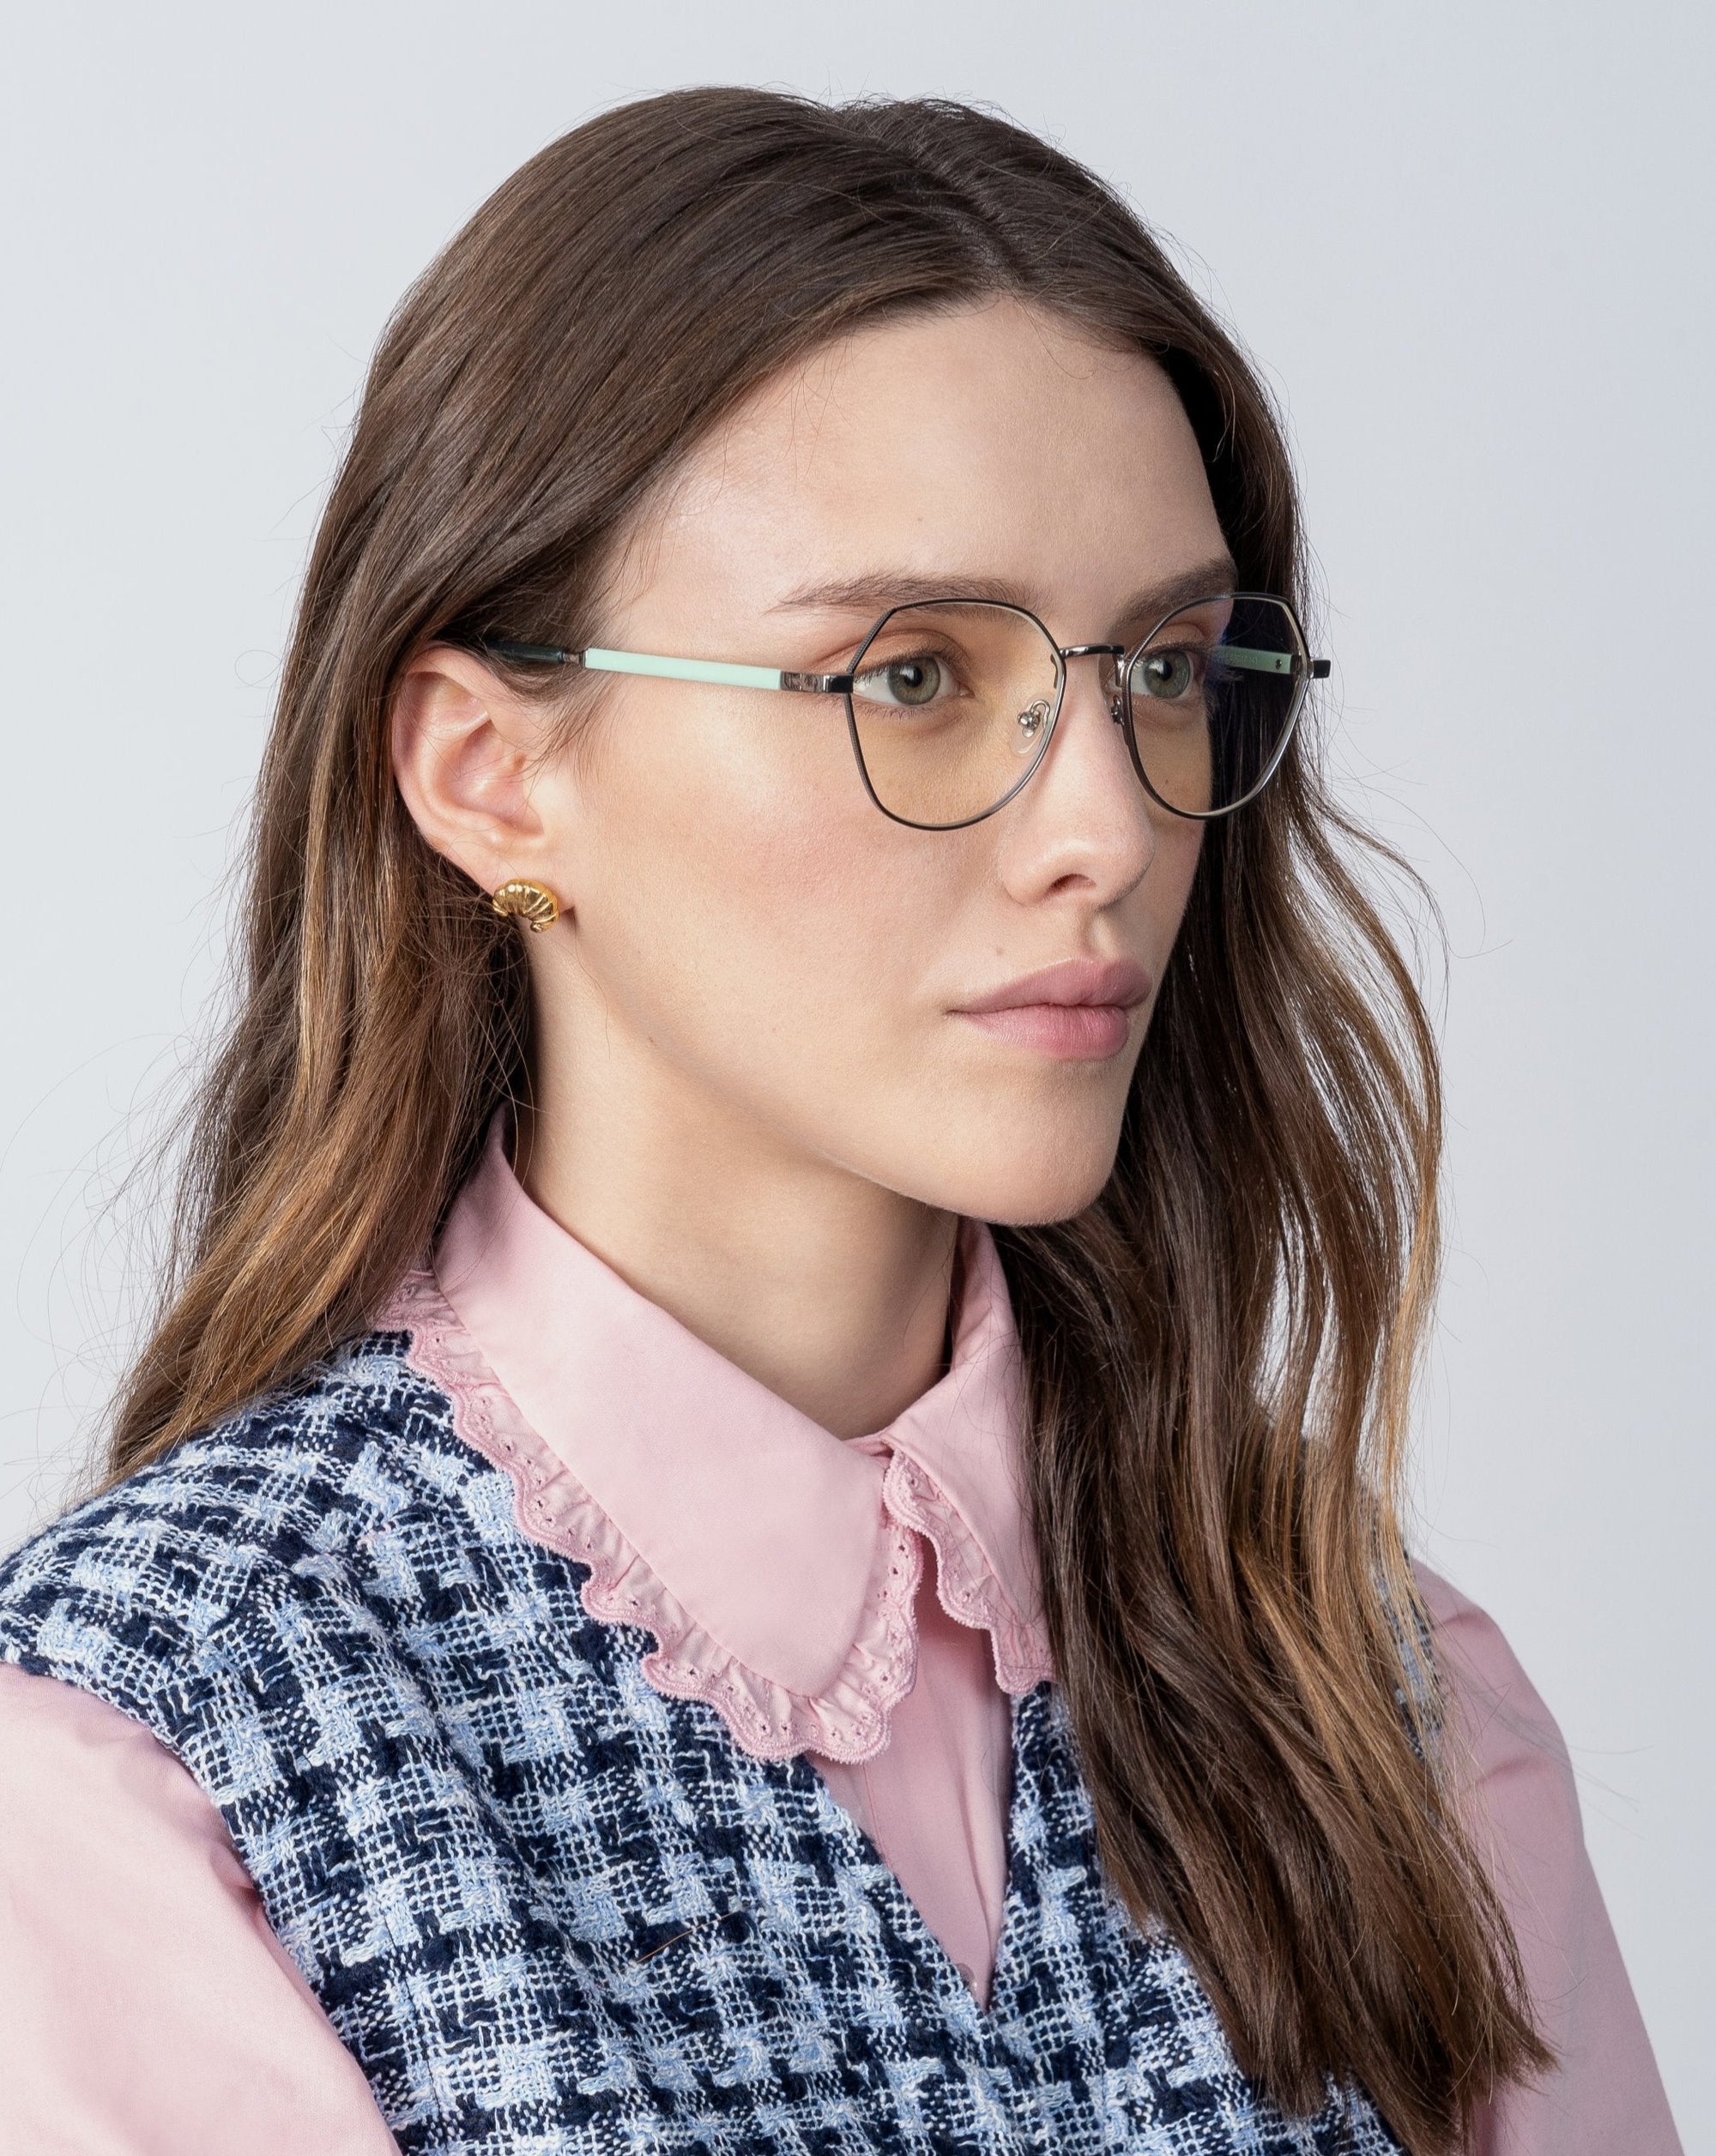 A young woman with long, wavy brown hair is wearing round, prescription Orchard lenses and metal-framed glasses by For Art&#39;s Sake®. She is dressed in a pink collared shirt with a lace trim and a blue patterned vest. She faces slightly to the left against a plain light background.